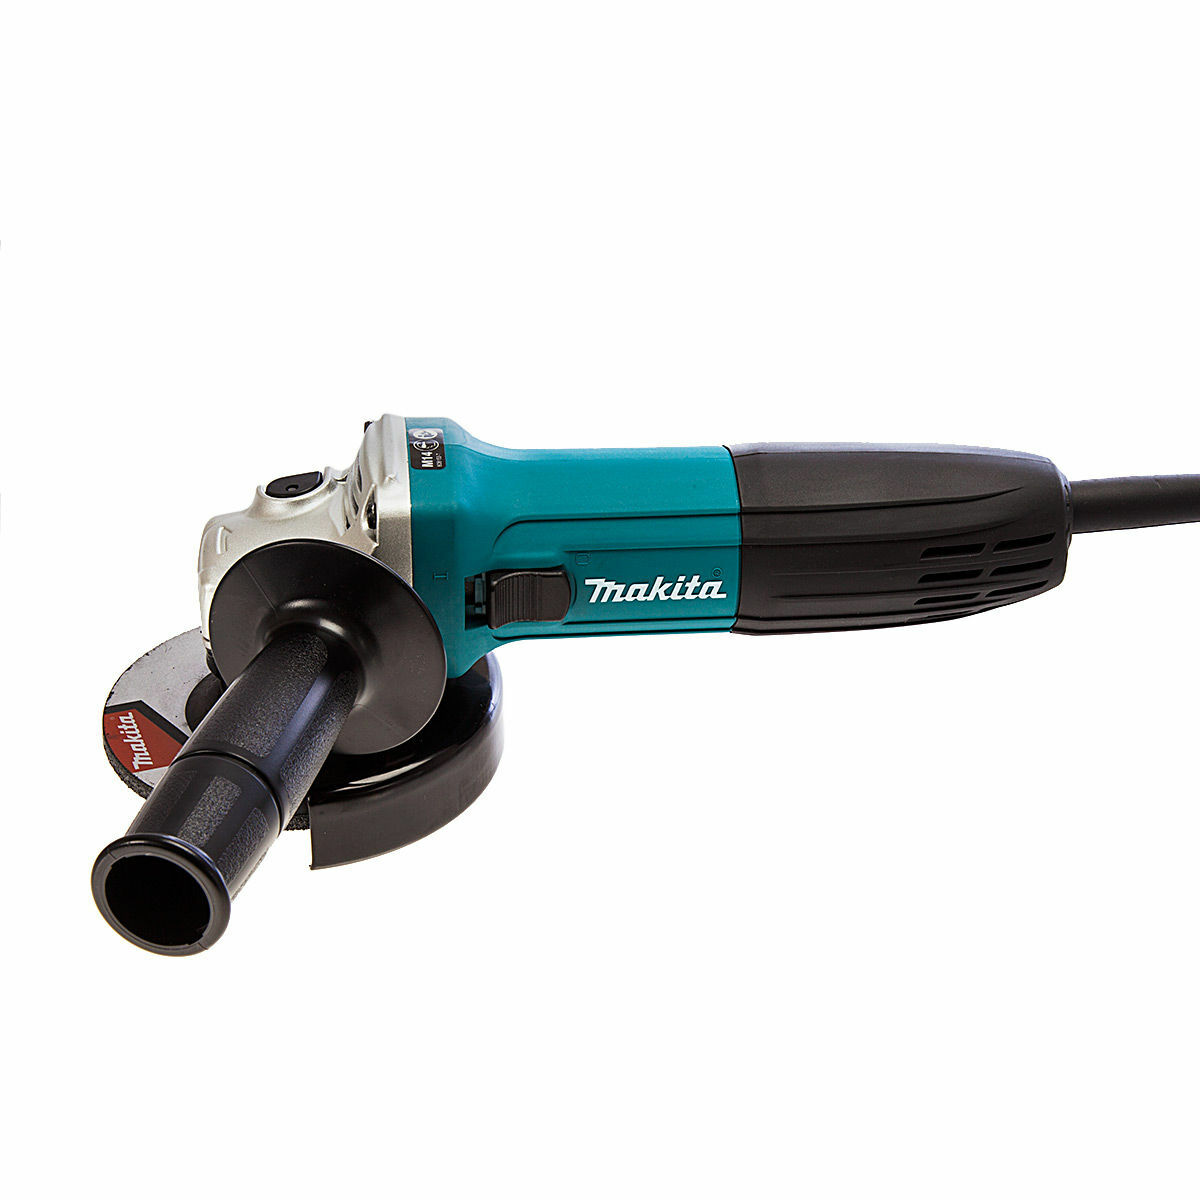 Makita 720w 115mm Grinder 240v MAKGA4530 | It provides easy and comfortable handling while minimizing hand fatigue and pain. | toolforce.ie